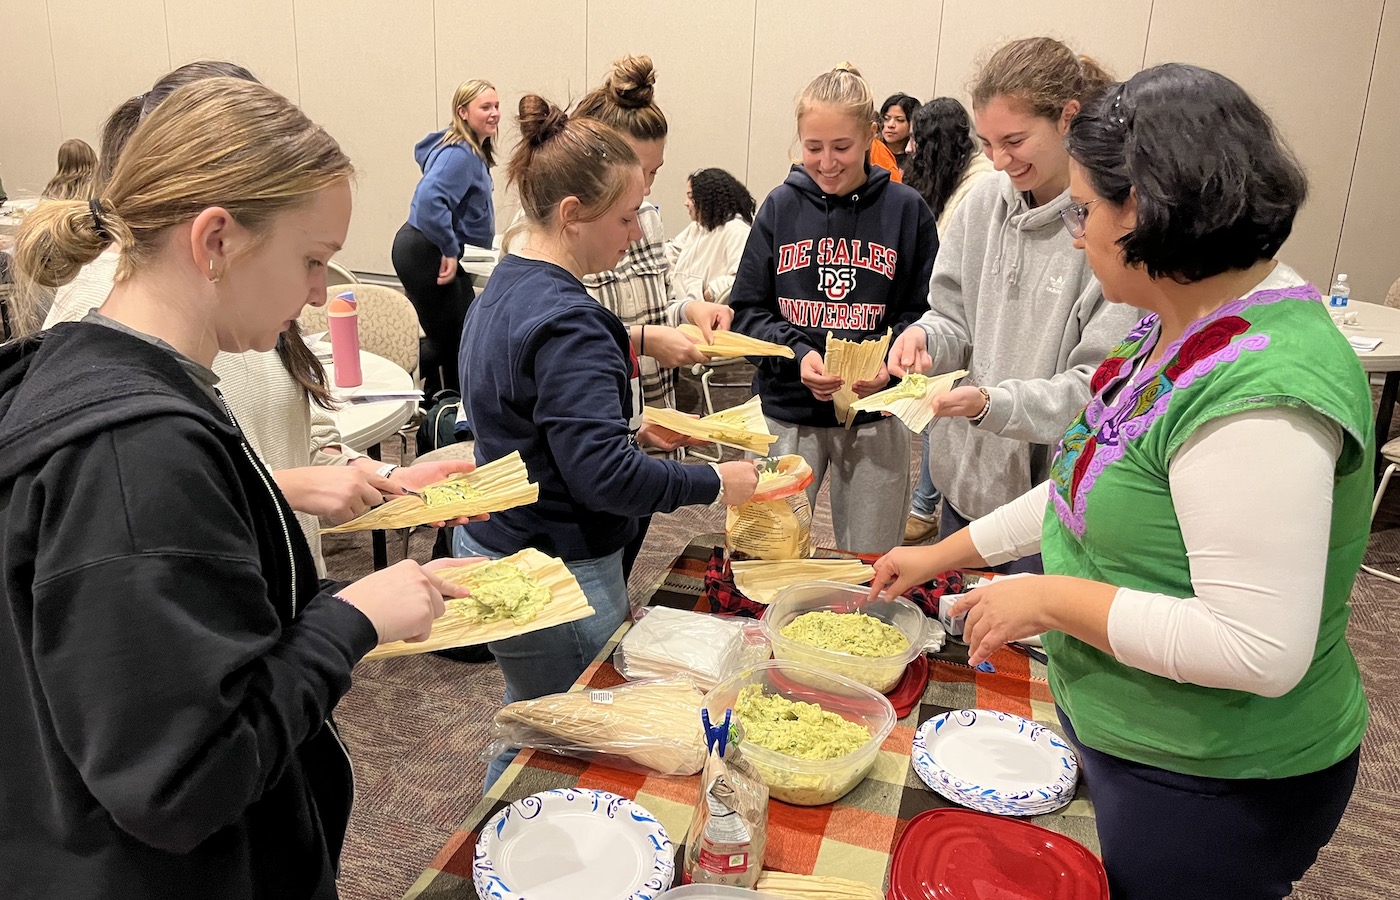 Students making tamales during Latin cooking class